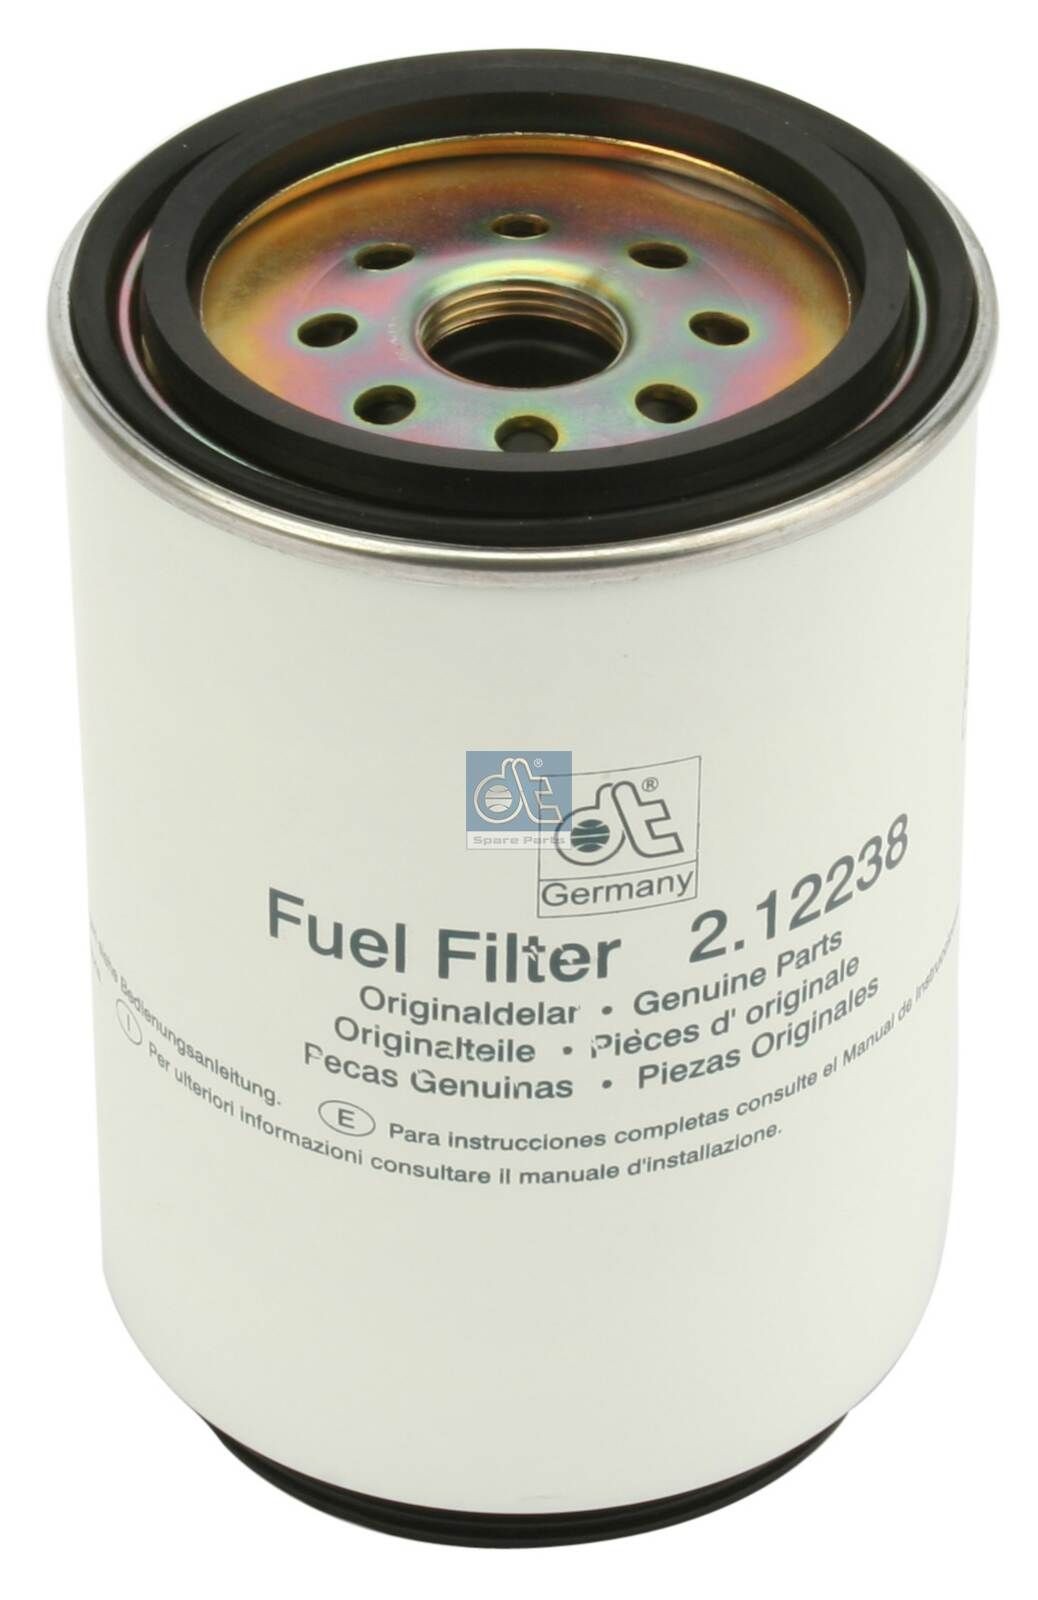 DT Spare Parts 2.12238 Fuel filter cheap in online store